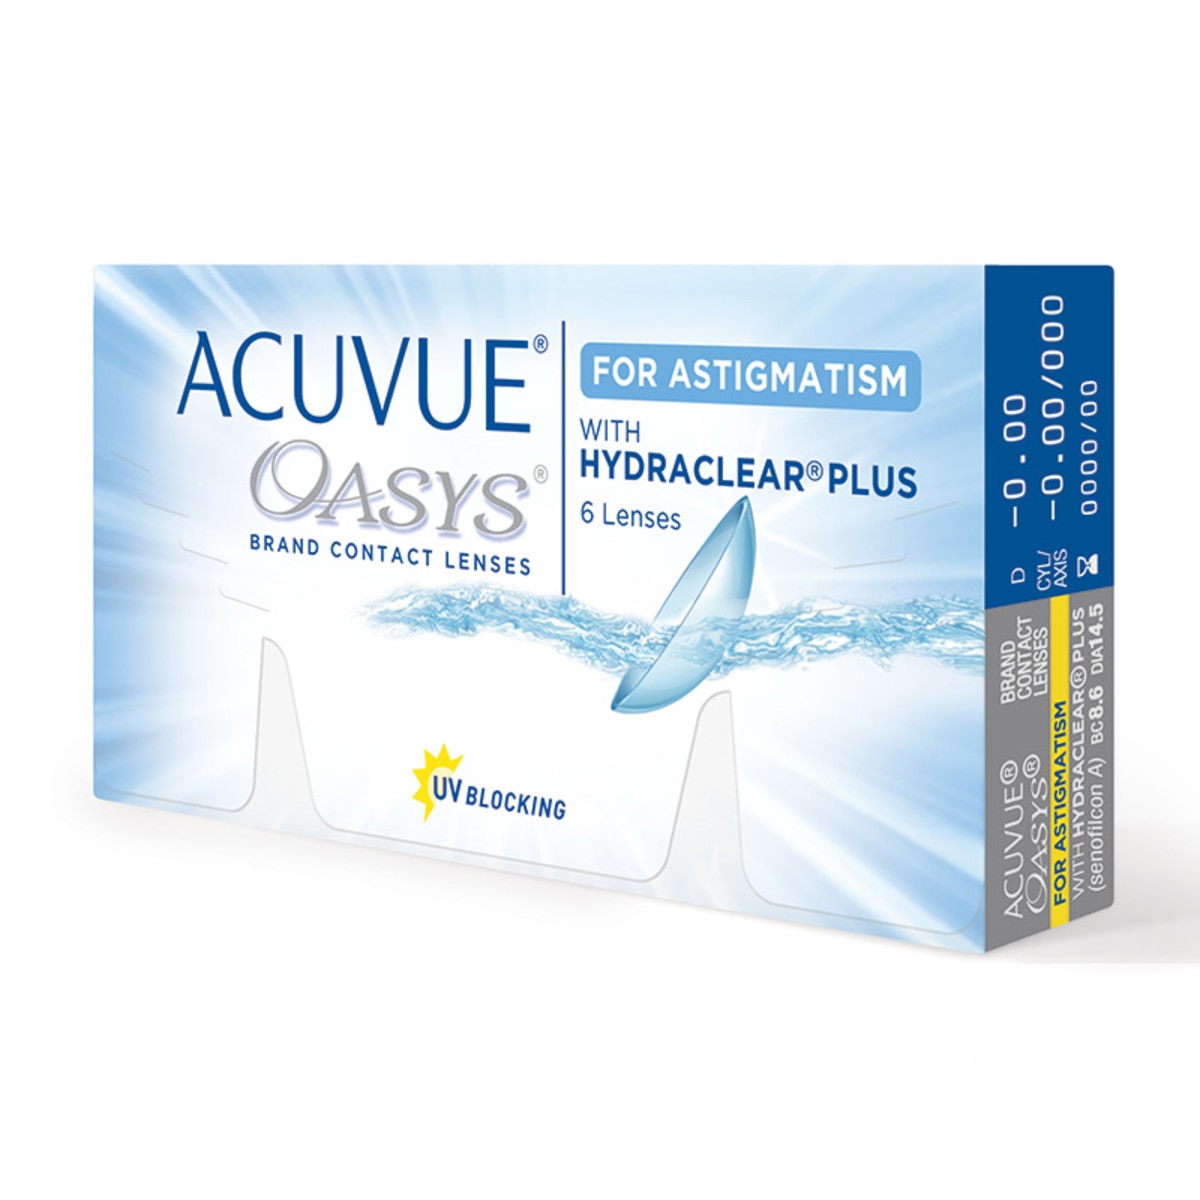 ACUVUE OASYS® con HYDRACLEAR Plus® para Astigmatismo (D -2.25, Cyl/Axis -2.25/10)